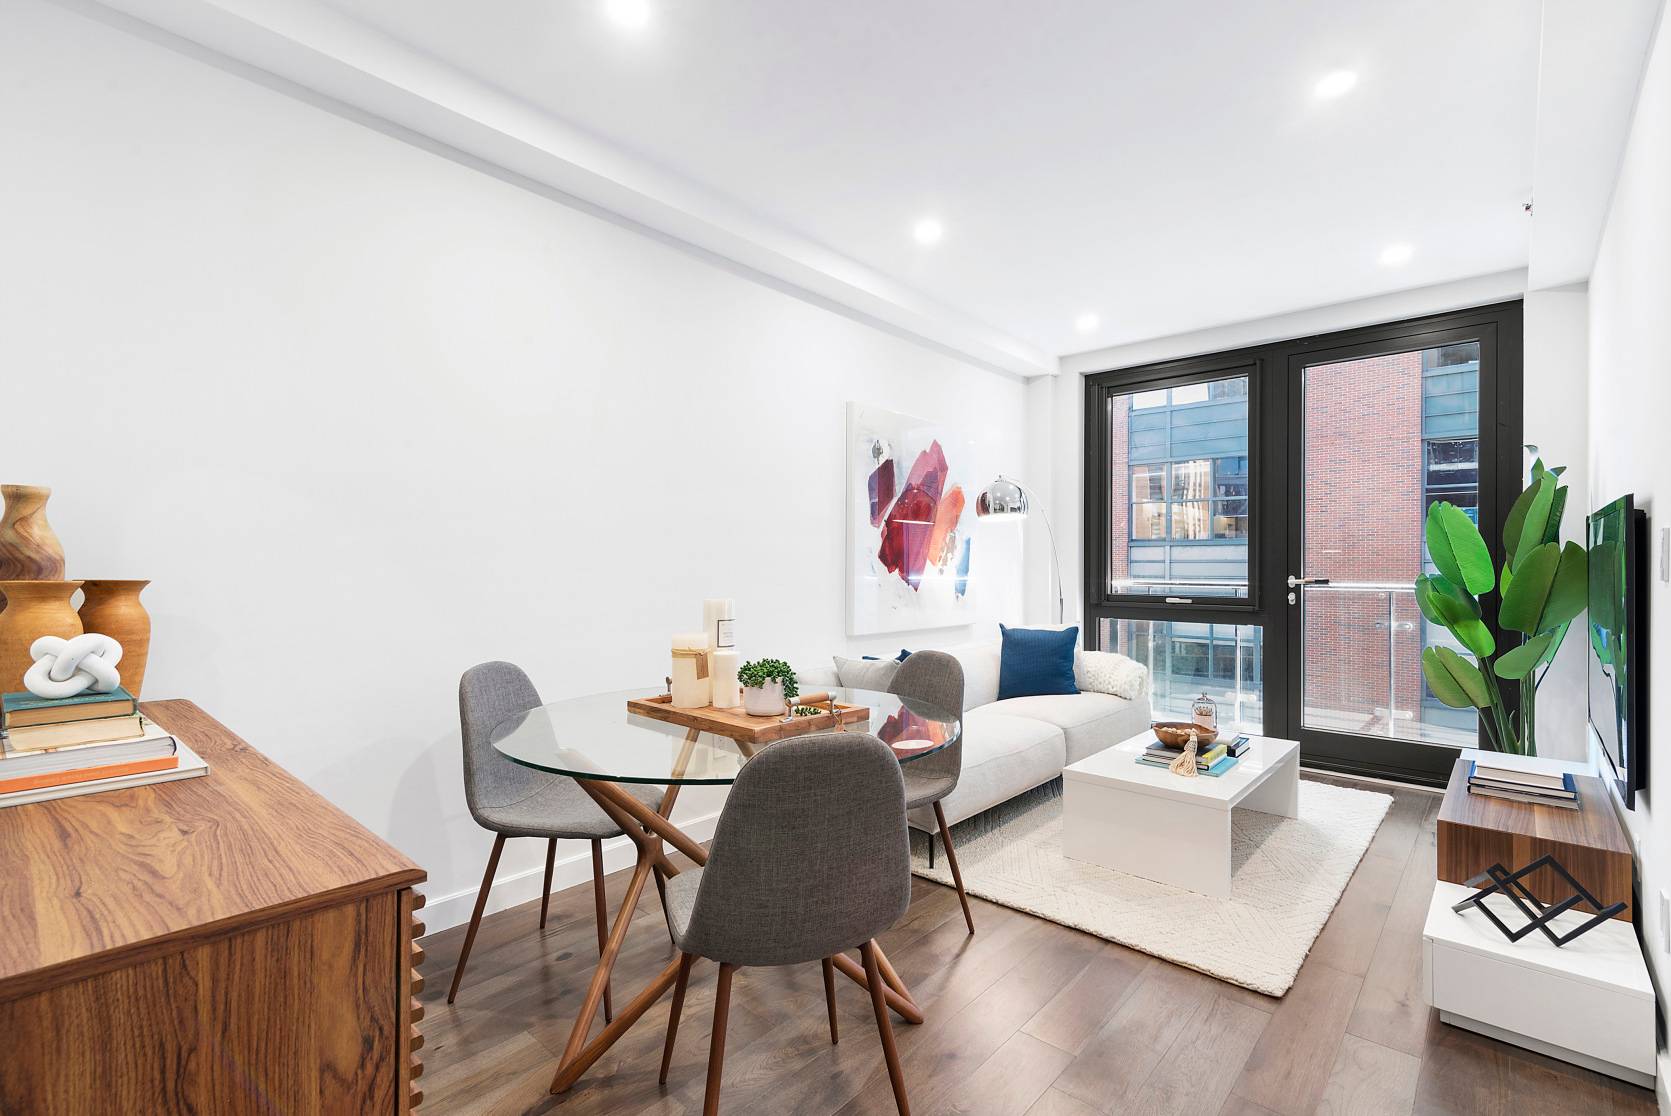 Welcome to Nexus LIC, a collection of well priced, upscale homes that emphasize sunlight and sleek European styling in the heart of Long Island City s ultra convenient Dutch Kills ...